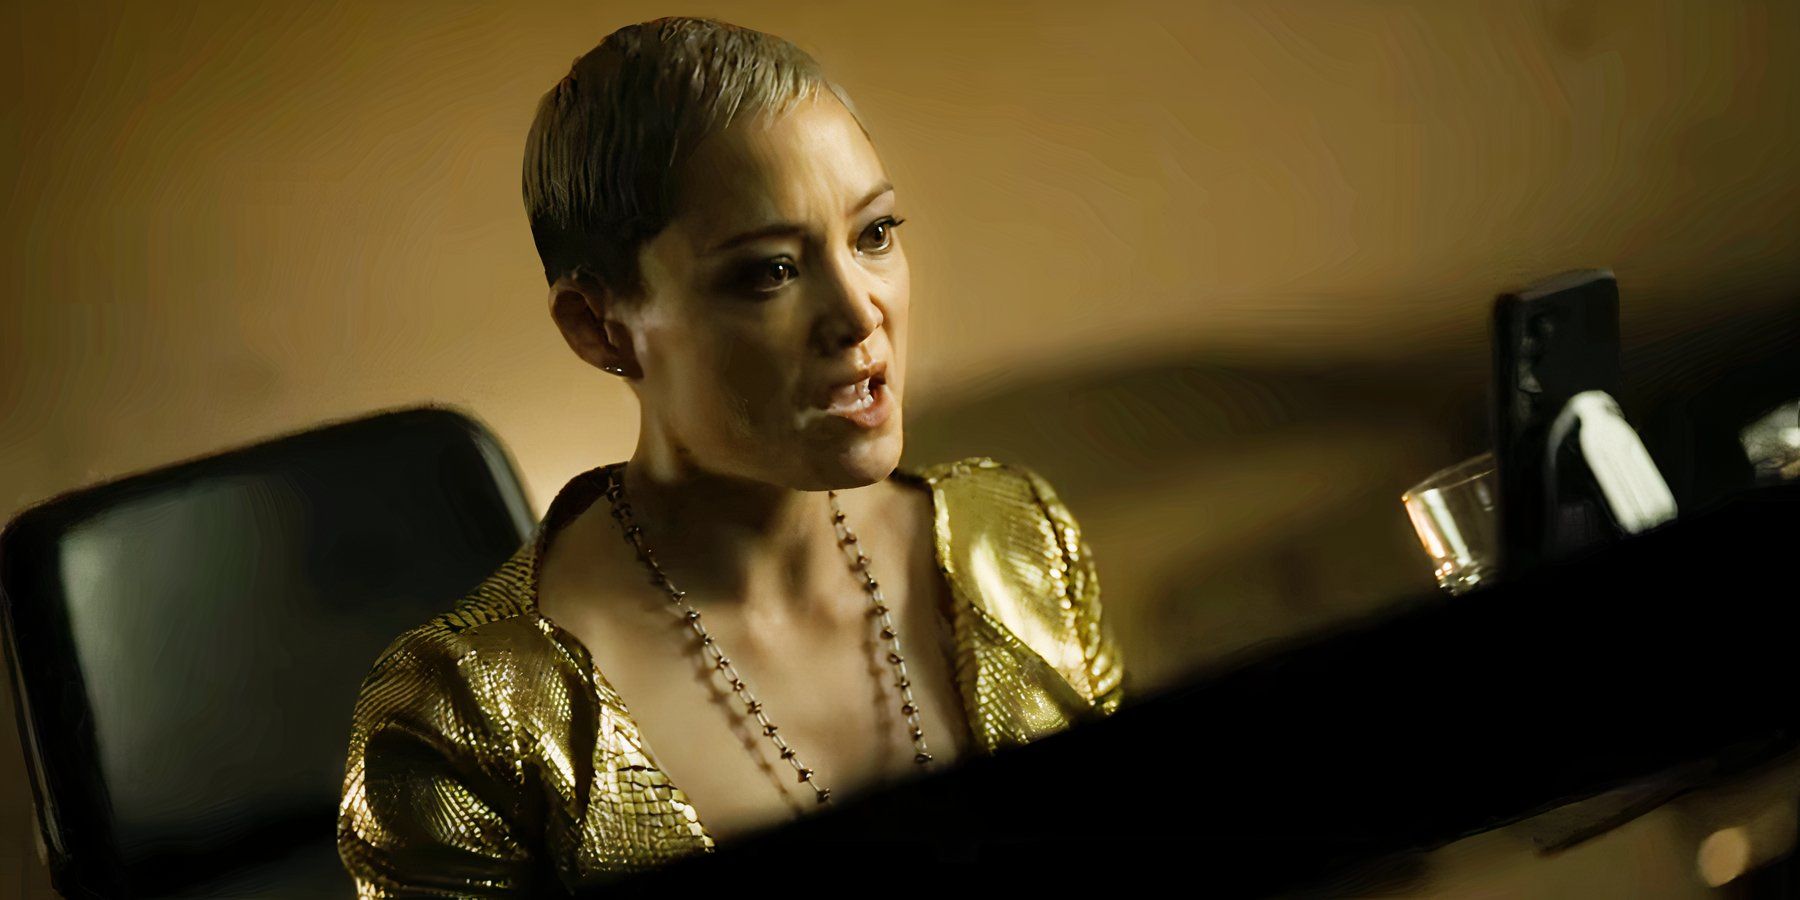 Pom Klementieff as Marianna in The Killer's Game